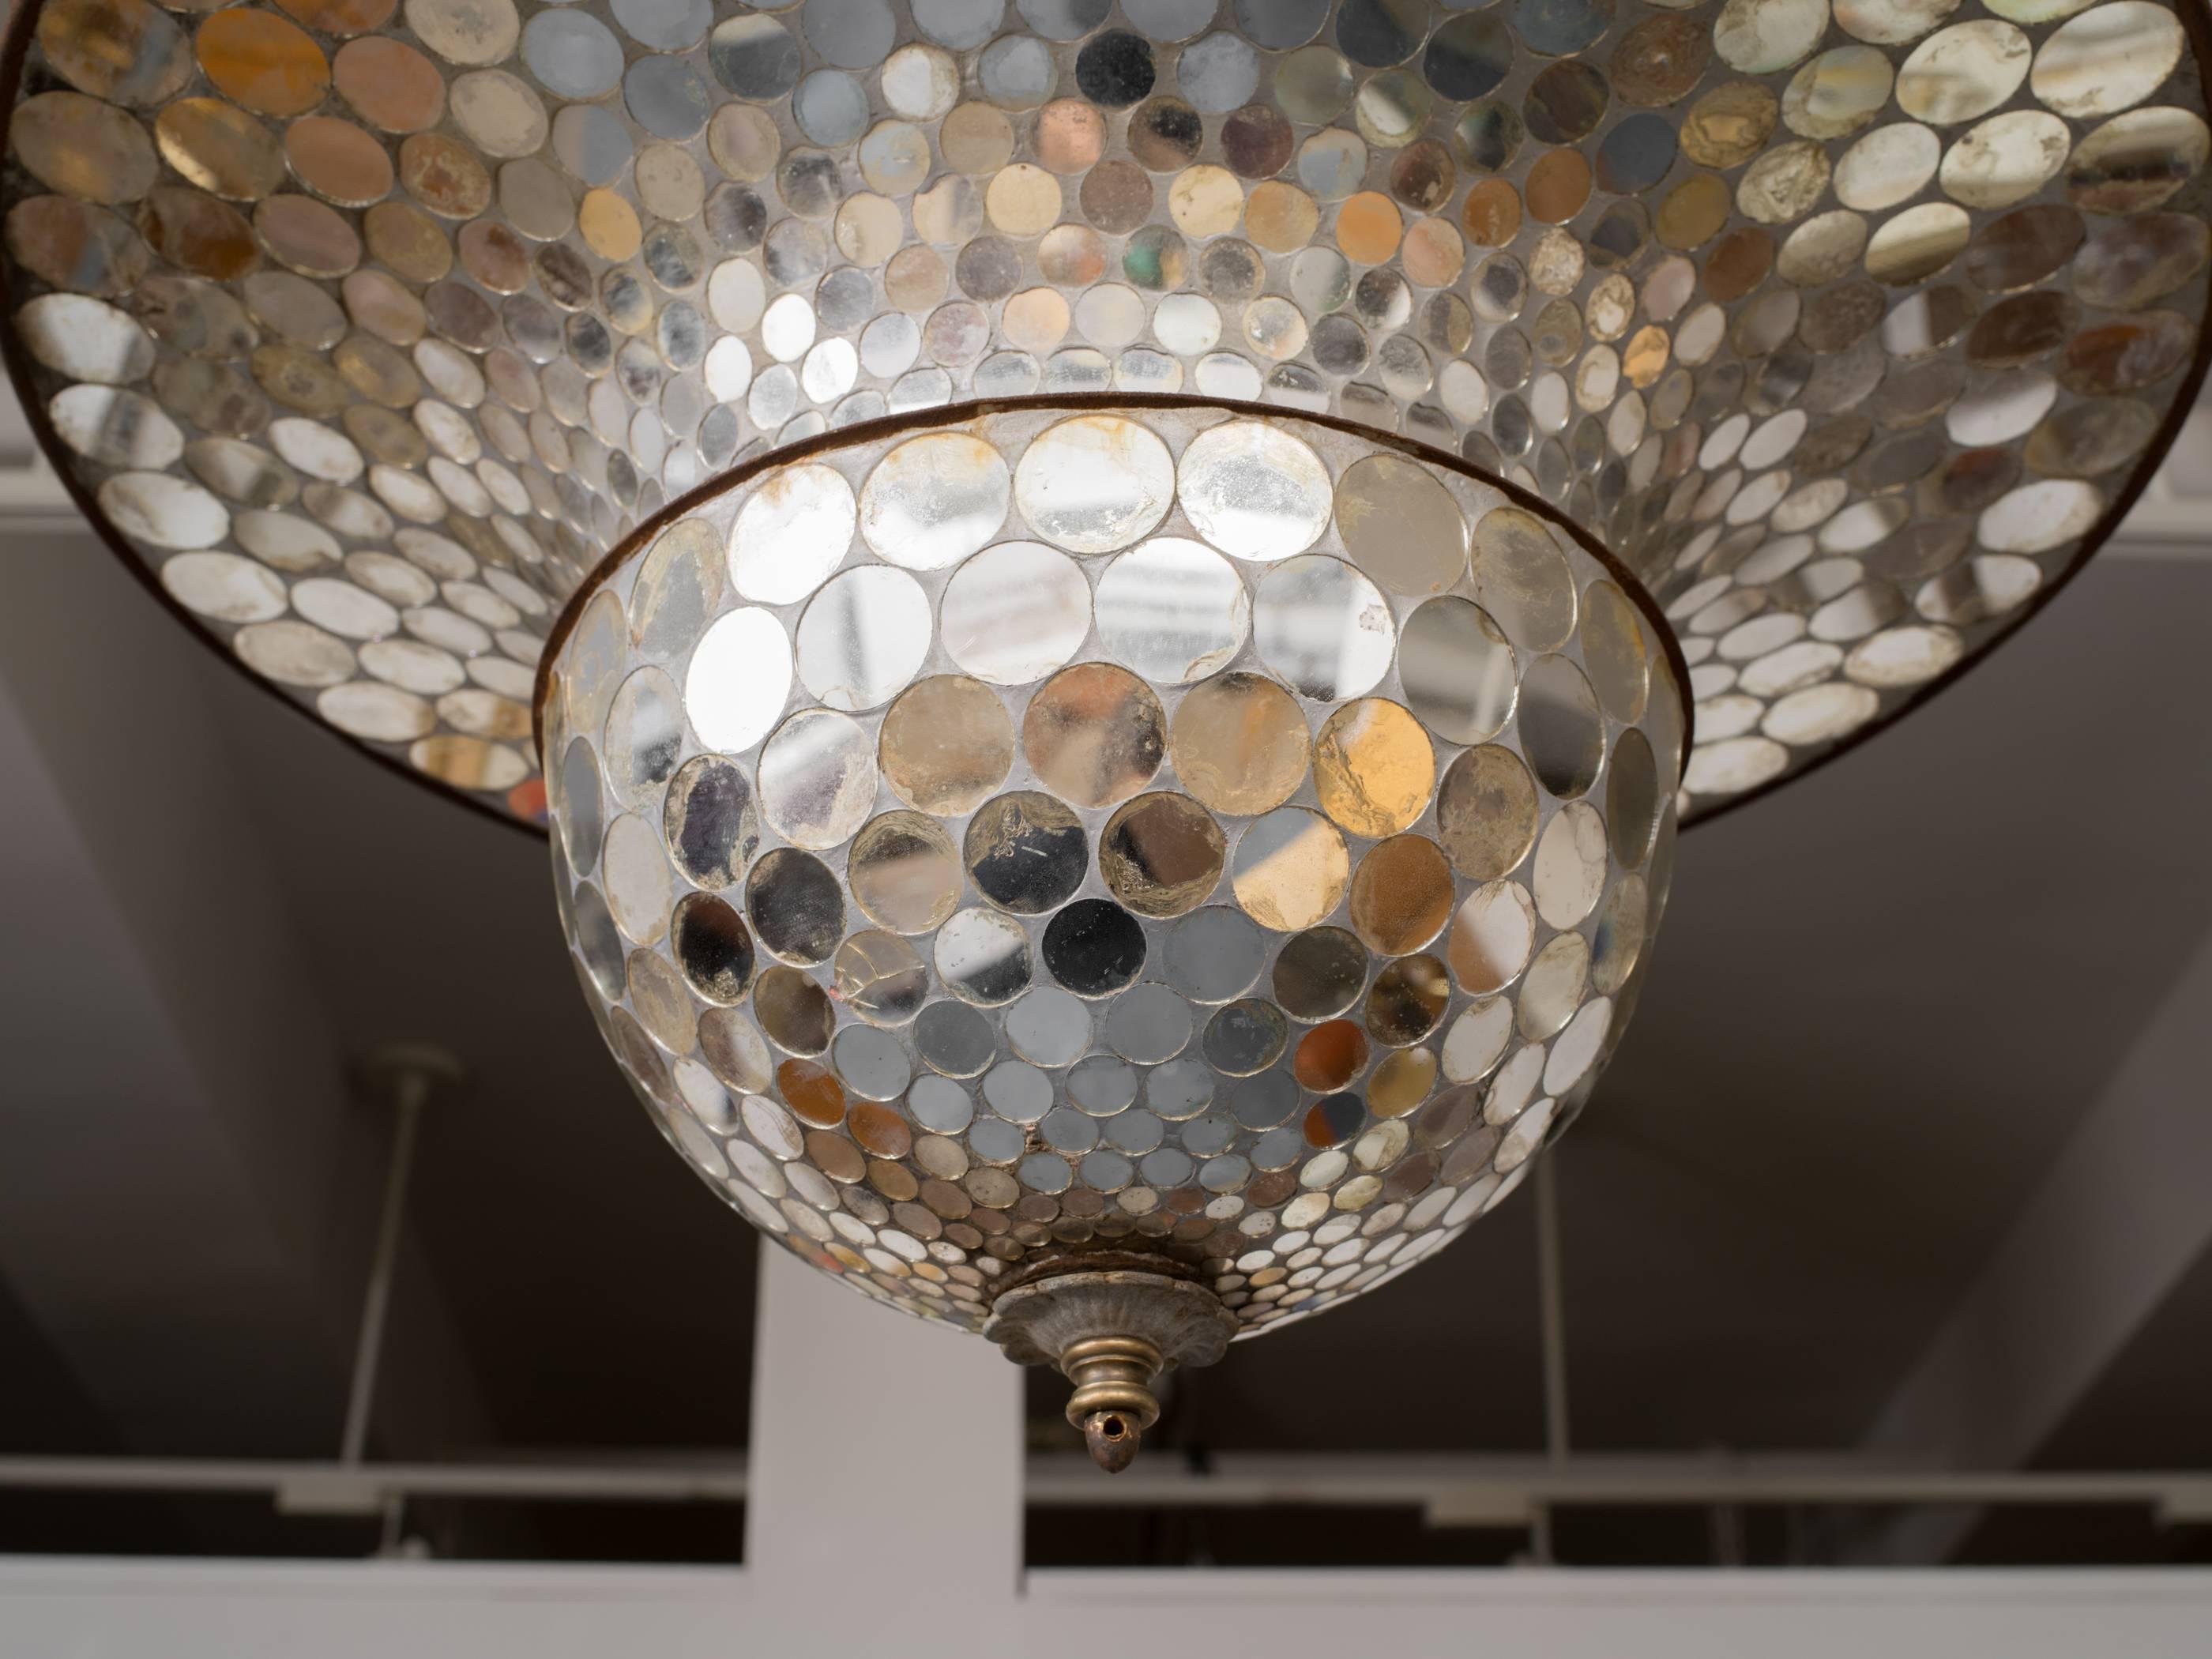 Whimsical mirrored mosaic suspension formally used as a disco ball it still has the electric motor that makes it revolve.
The interior newly fitted with light bulbs.